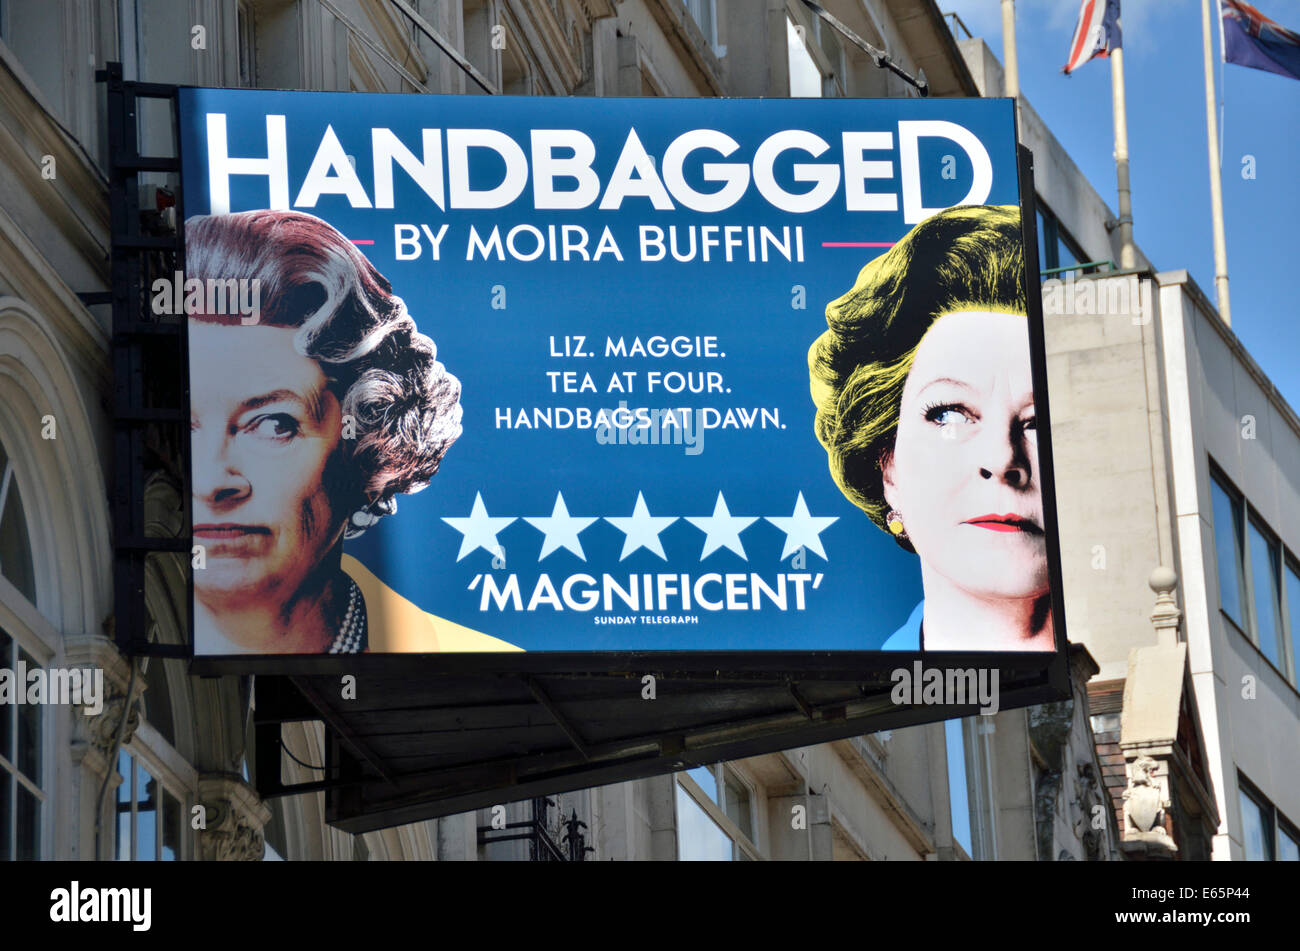 Giant billboard outside the Vaudeville Theatre promoting the stage play Handbagged, London, UK. Stock Photo